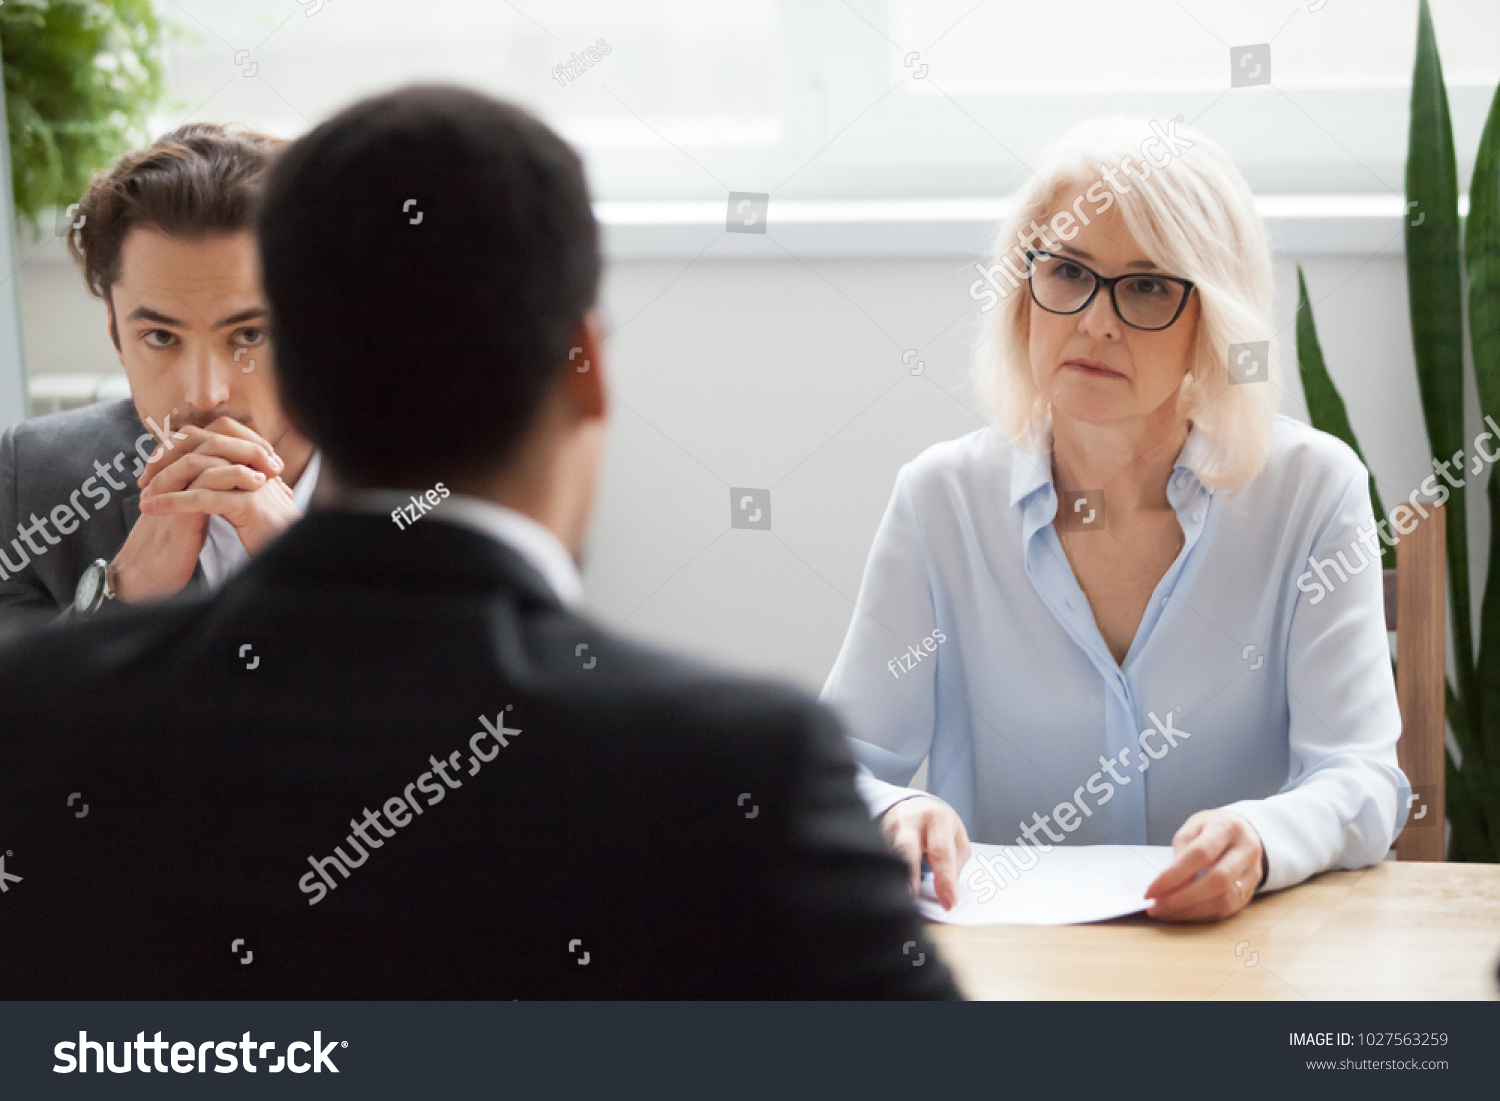 Serious attentive senior female hr manager employer listening to candidate at job interview, focused strict mature businesswoman thinking about hiring decision at difficult group negotiations concept #1027563259